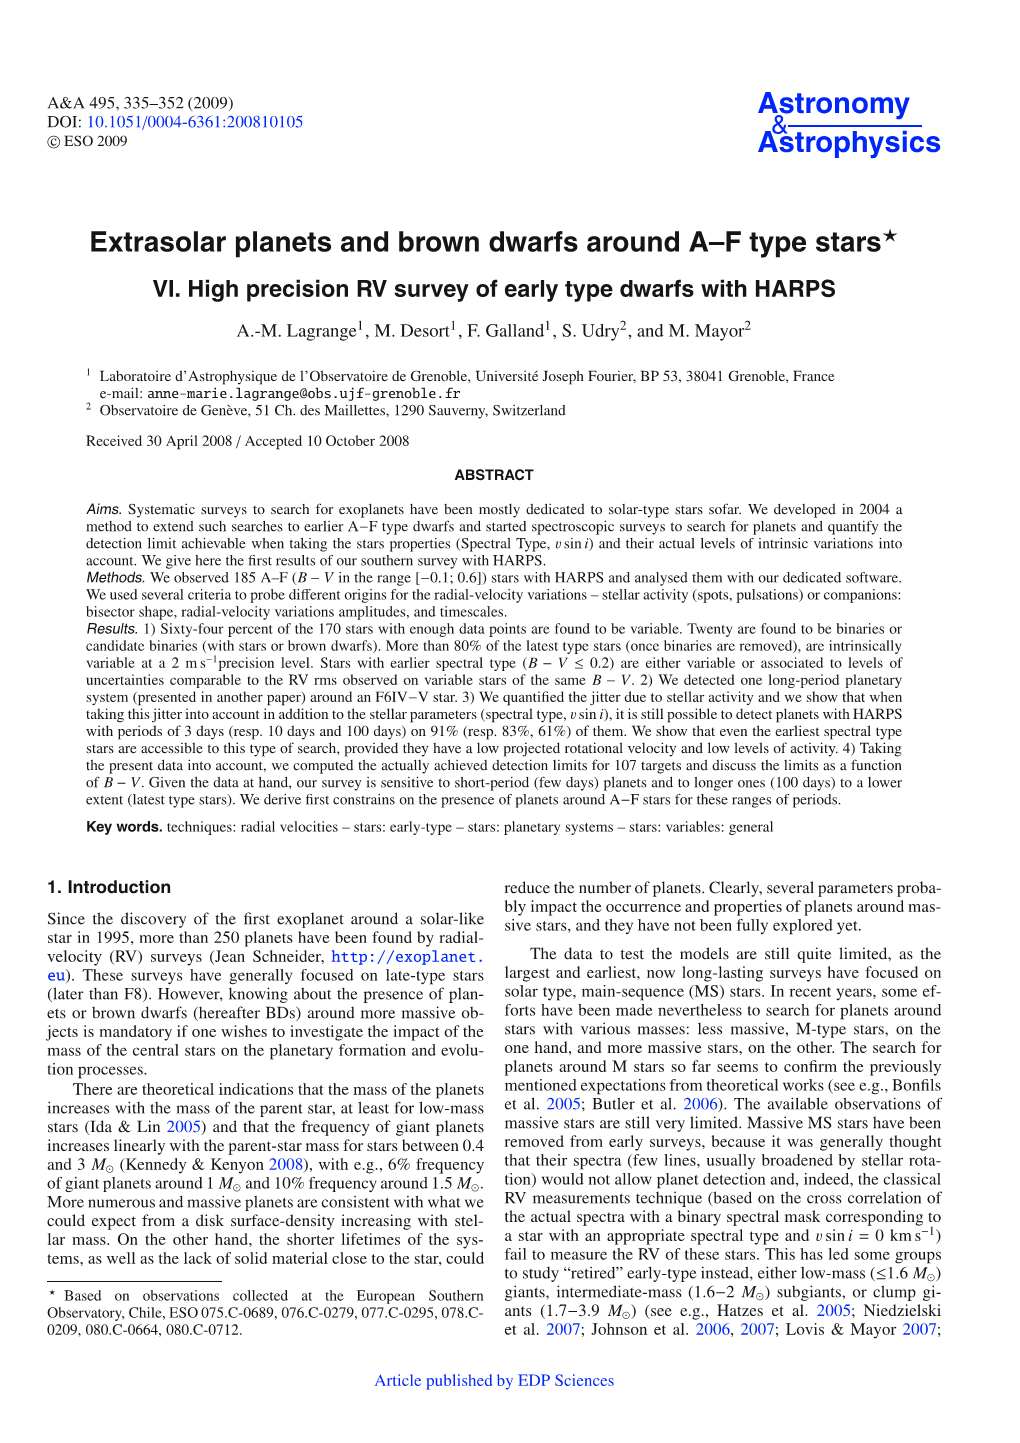 Extrasolar Planets and Brown Dwarfs Around A–F Type Stars VI